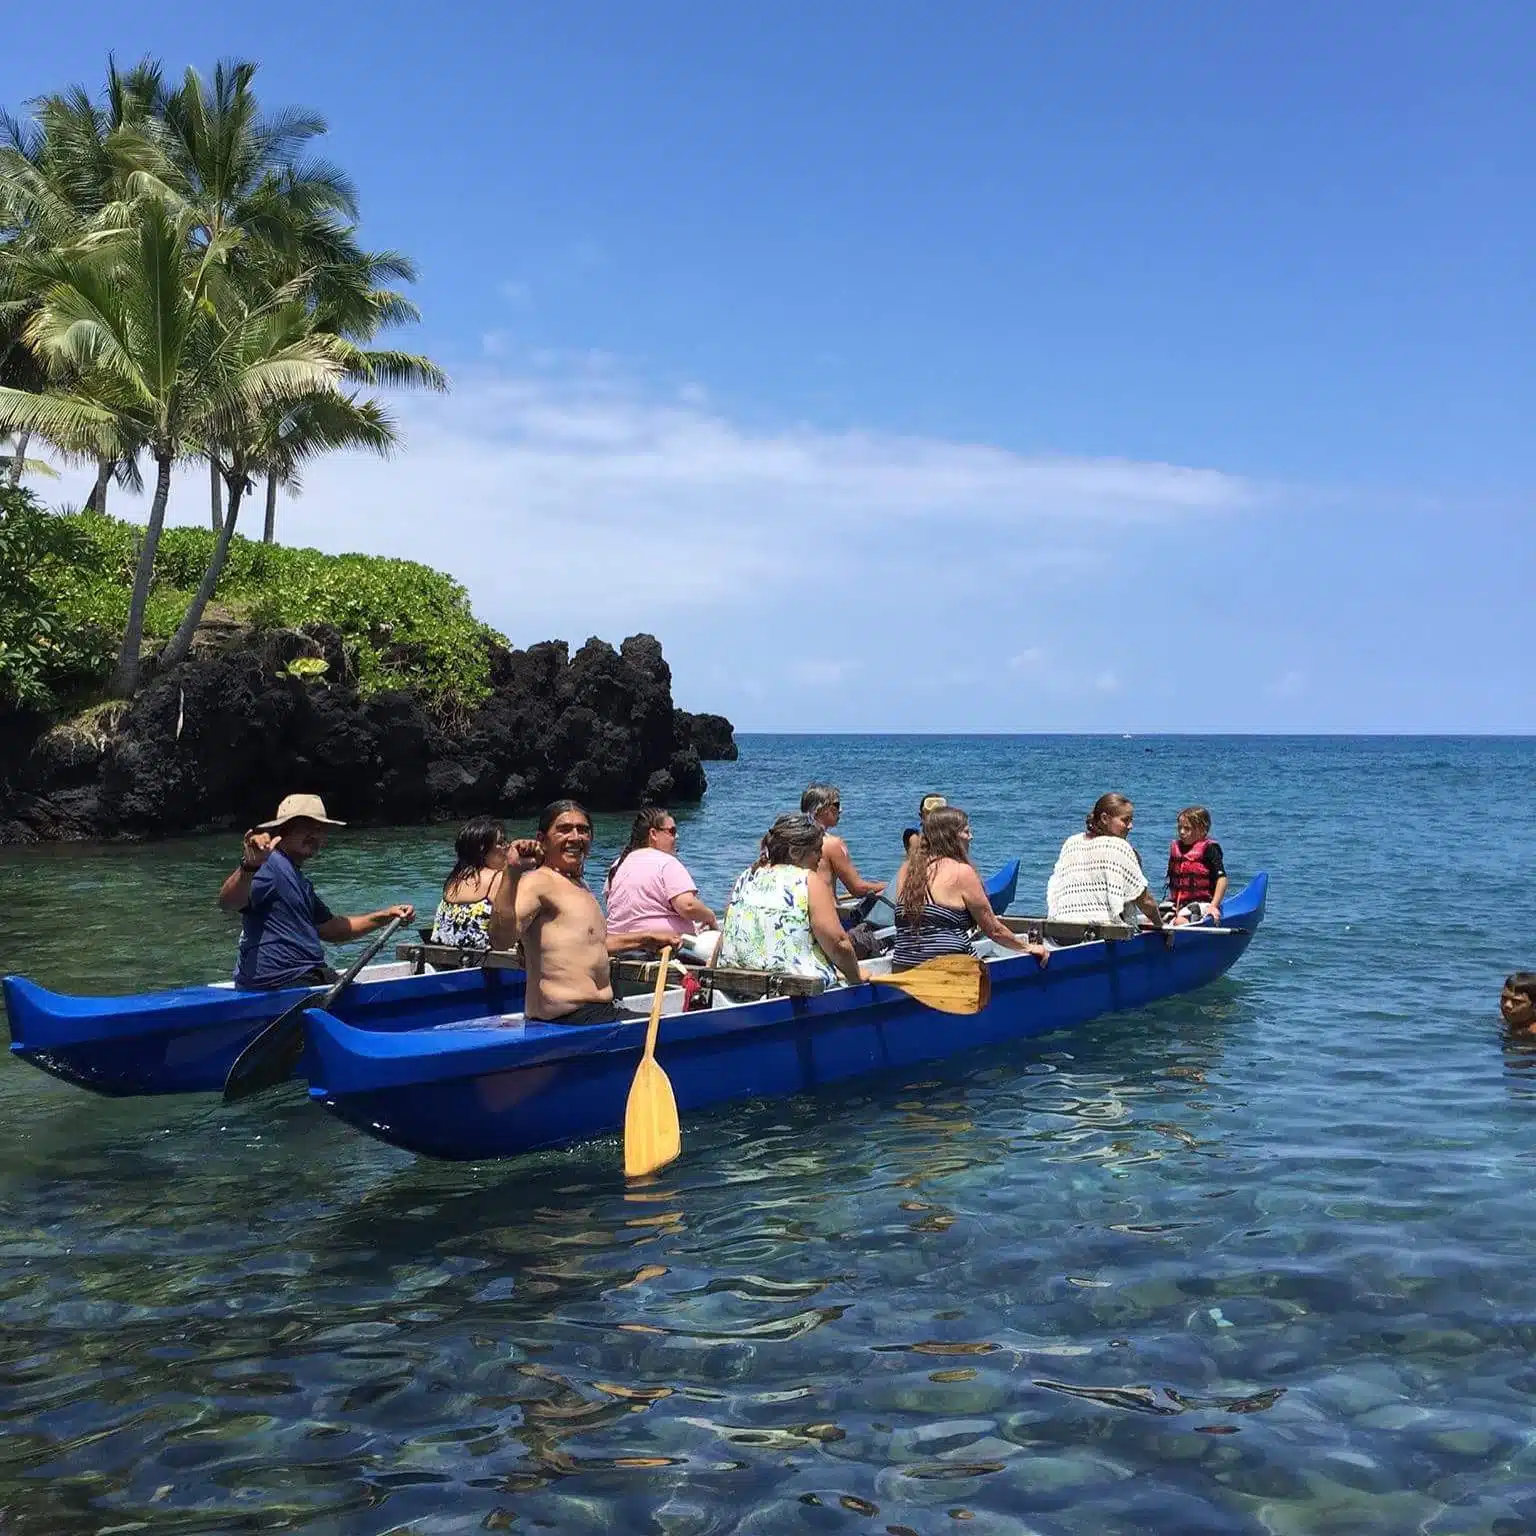 Historical Hawaiian Adventure is a Water Activity located in the city of Captain Cook on Big Island, Hawaii